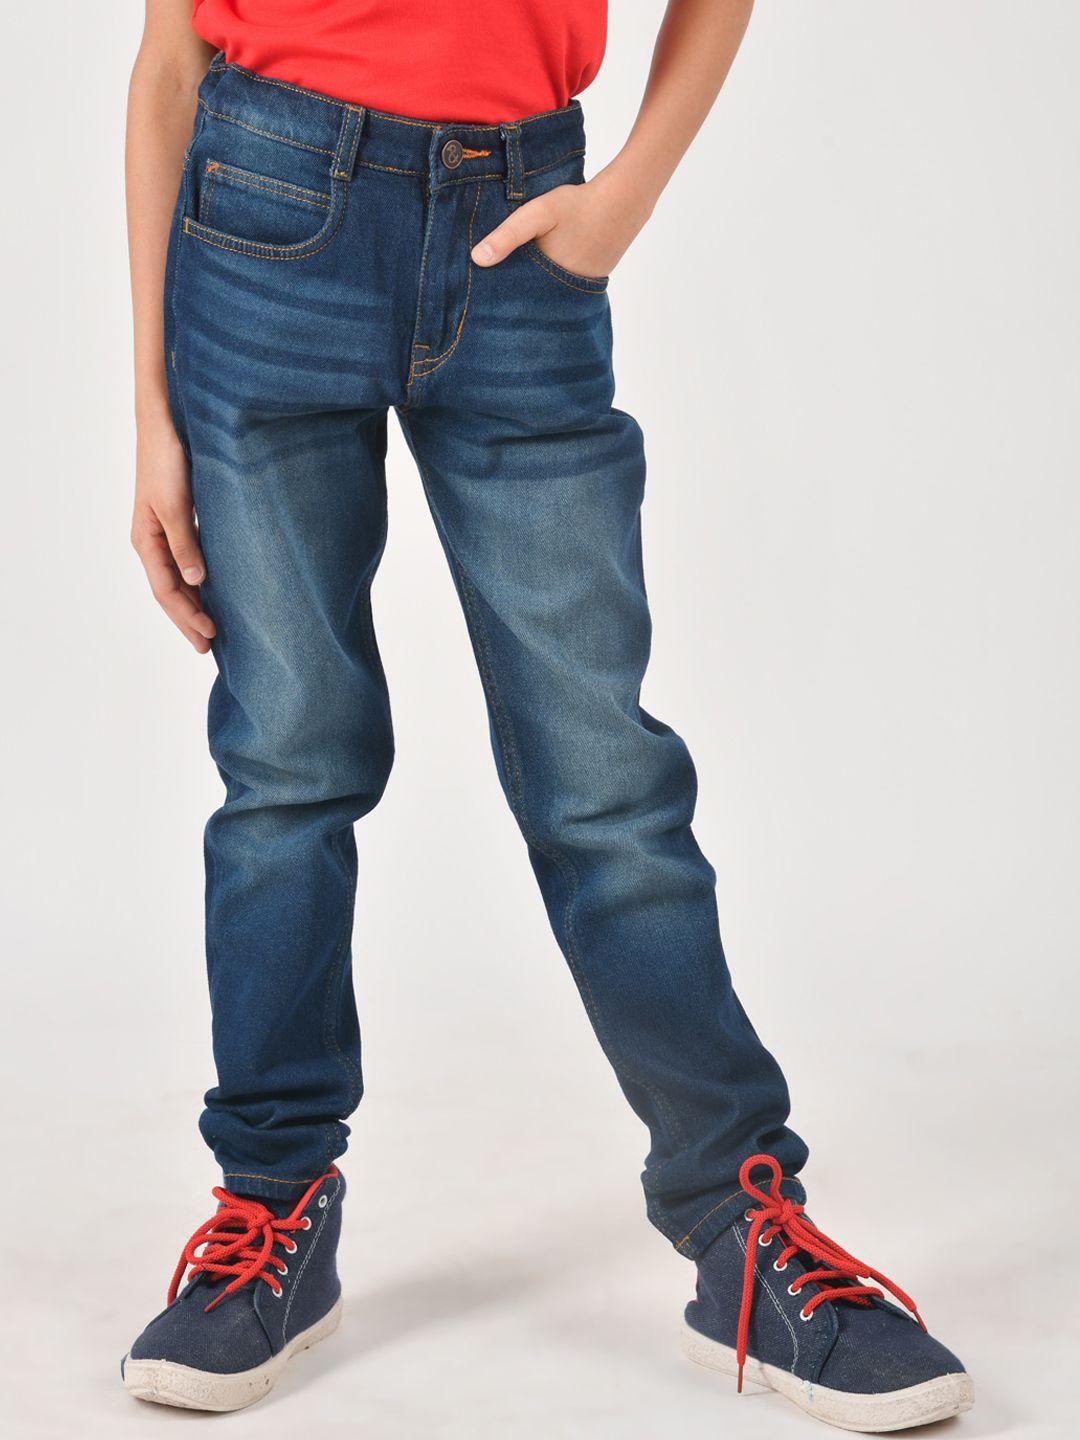 tales-&-stories-boys-slim-fit-light-fade-stretchable-jeans